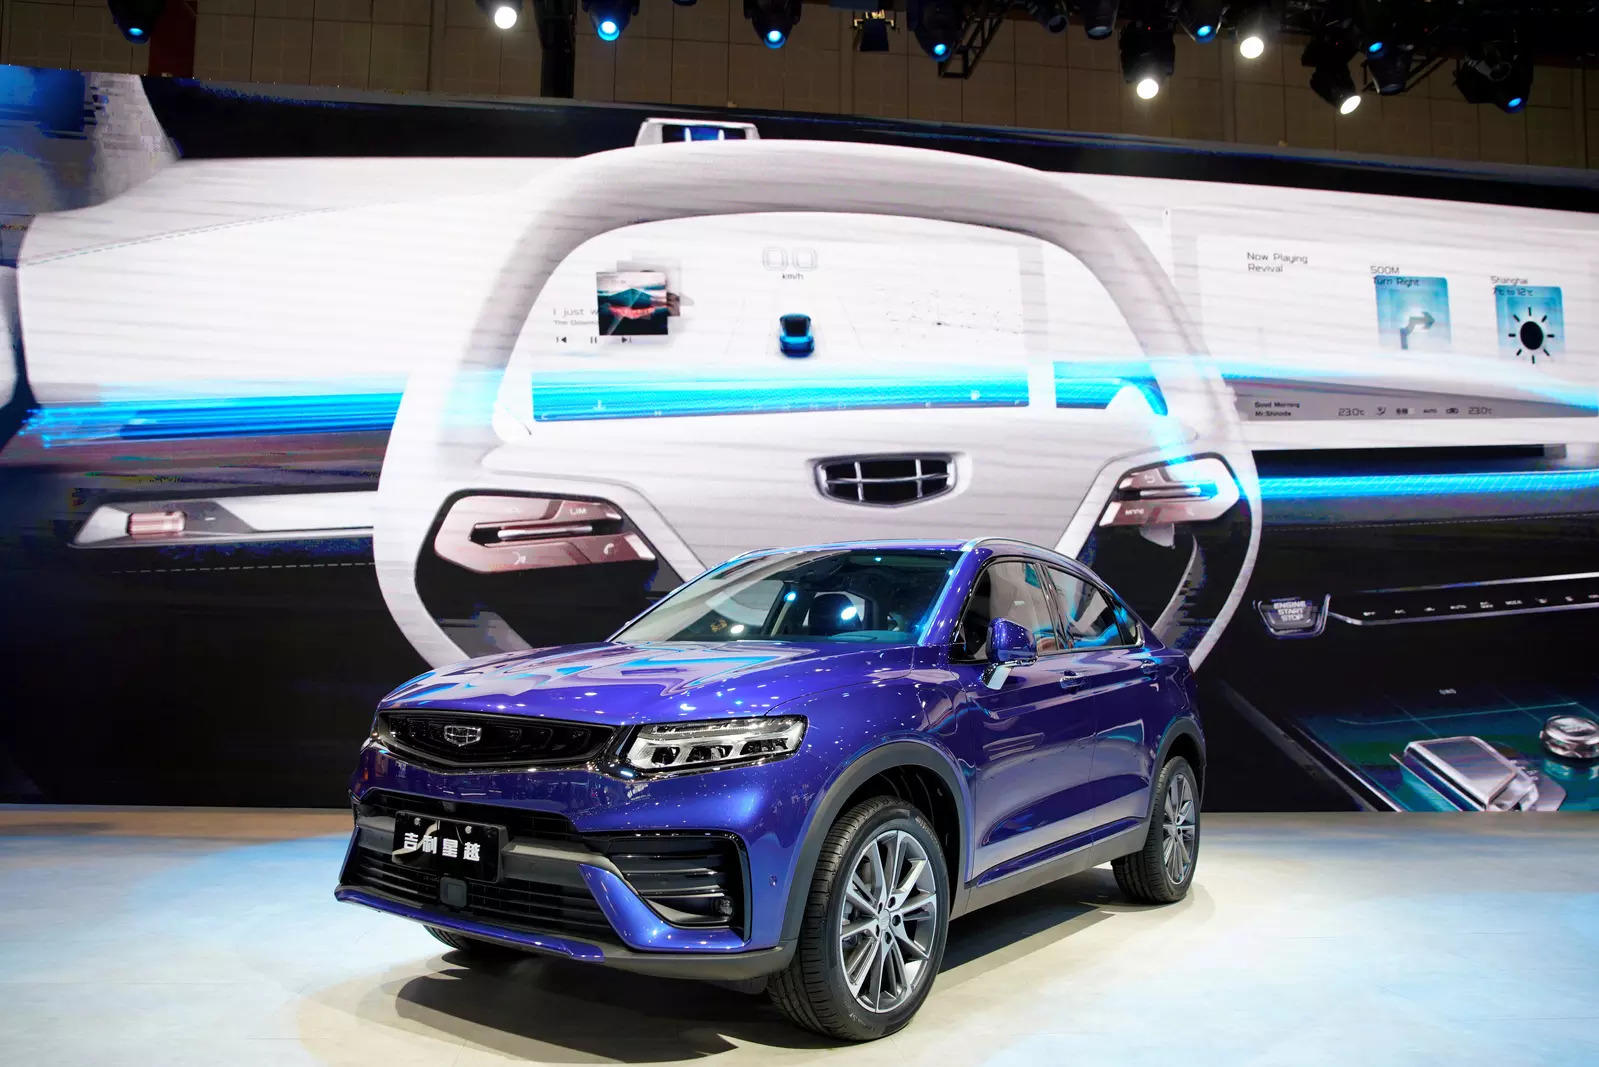 The new entity, expected to become operational this year, will provide engines, transmissions systems and petrol-electric hybrid systems for use by both companies as well as other automakers.